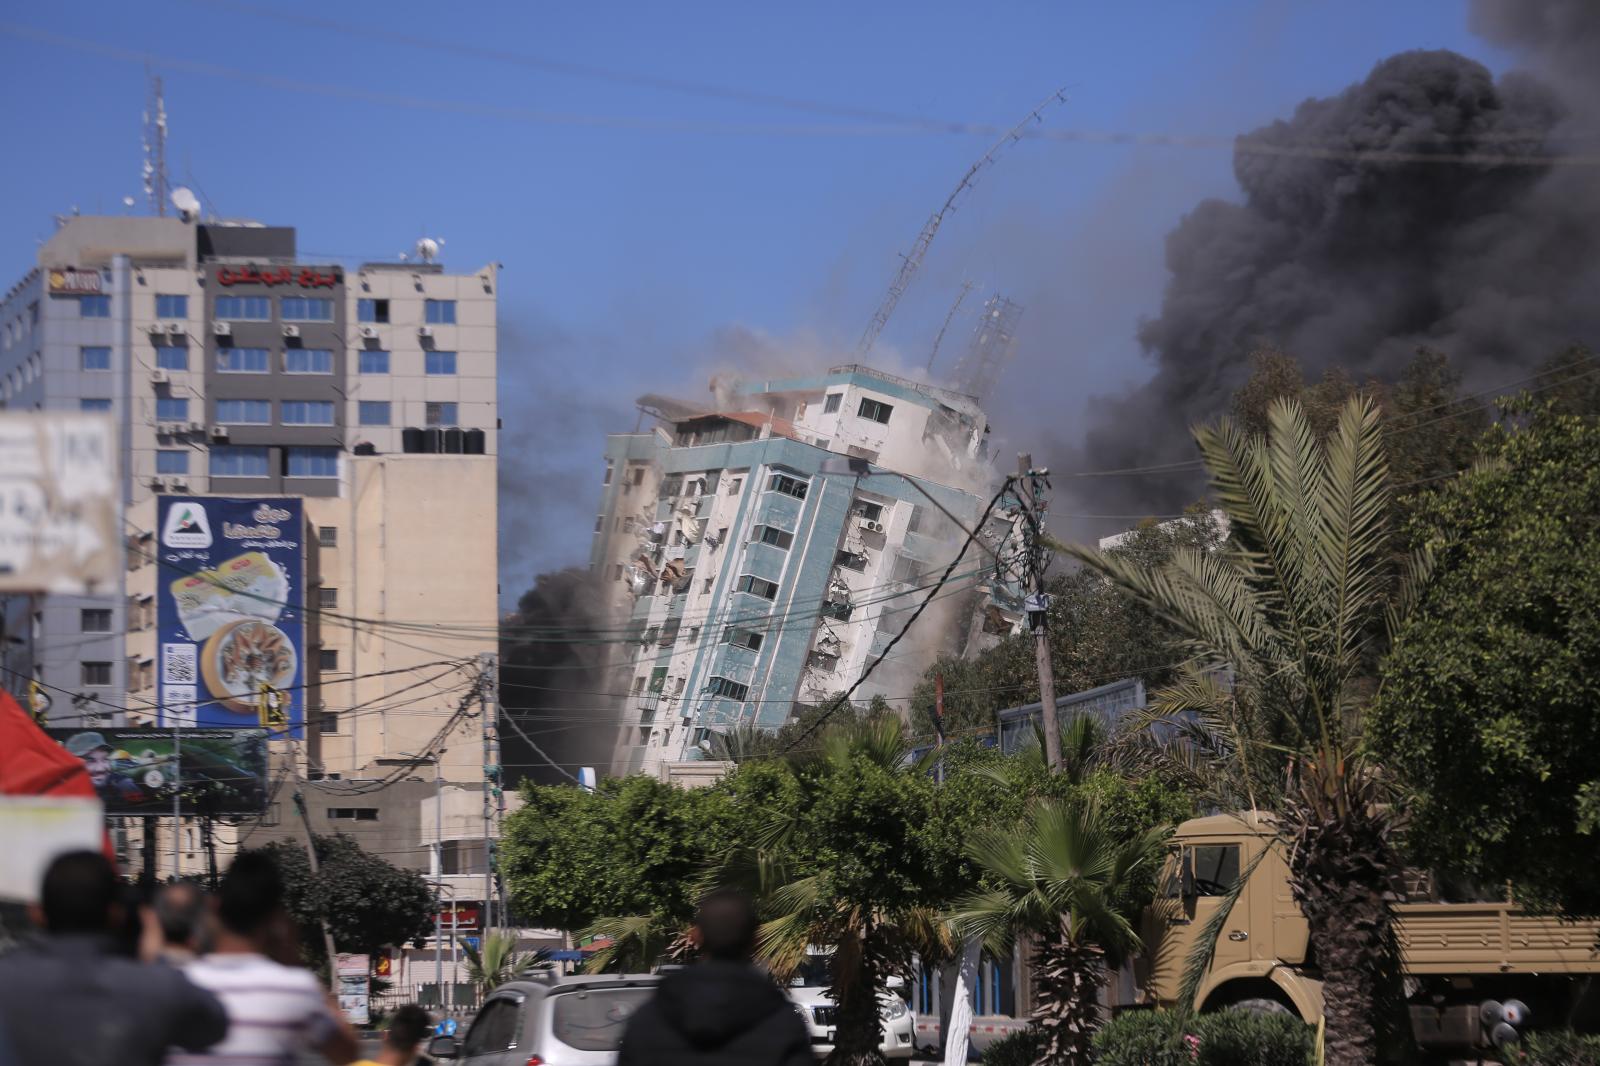 The Gaza Strip - The evacuation tower fell in the center of Gaza City...